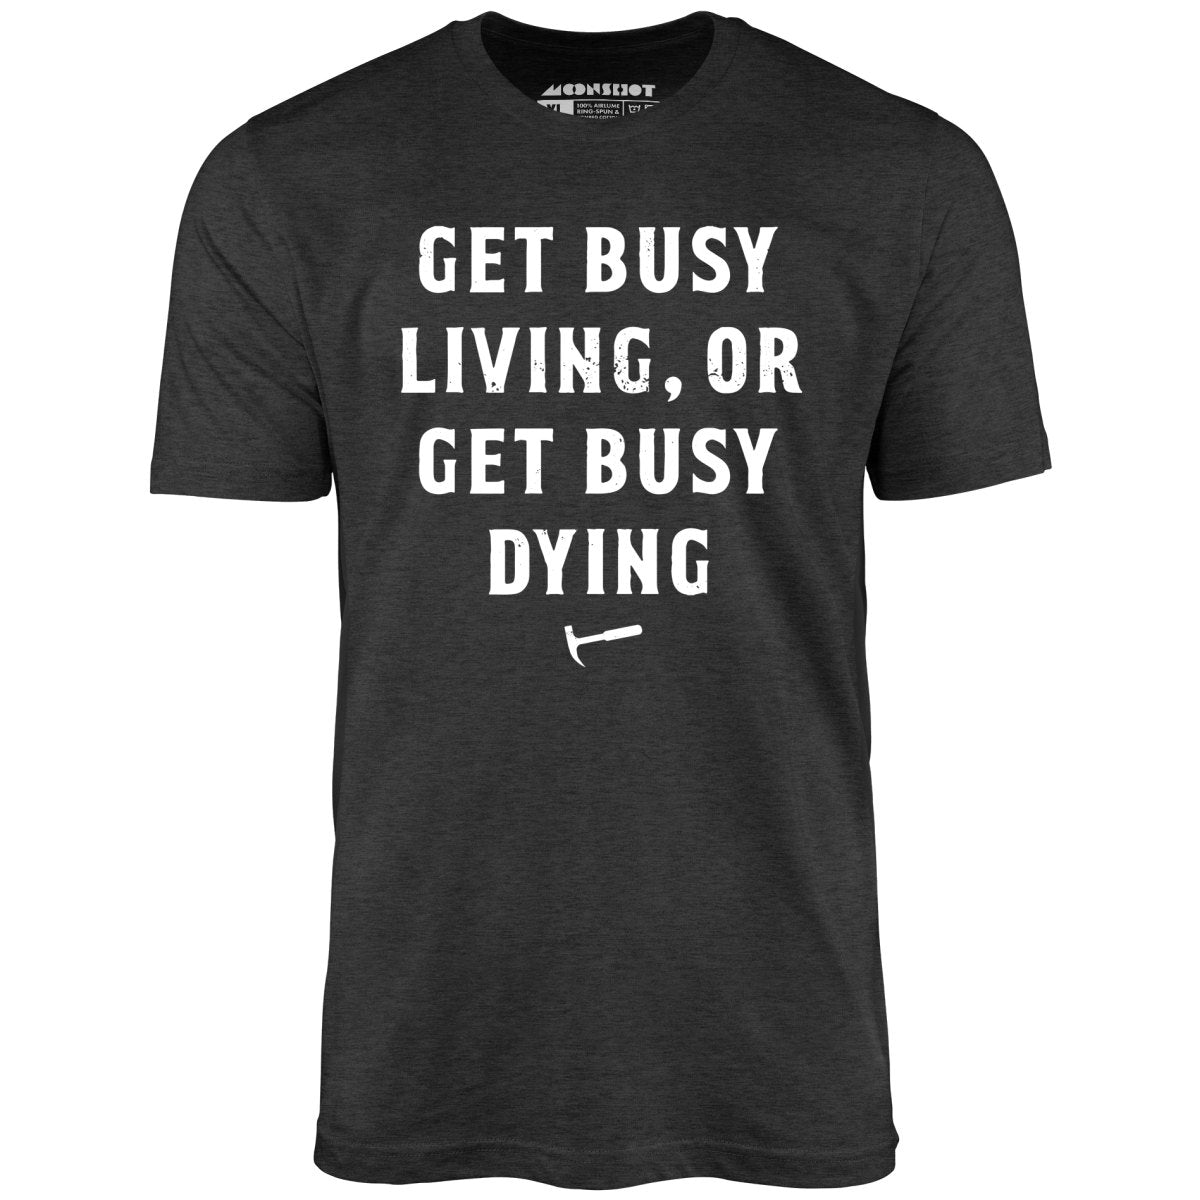 Get Busy Living or Get Busy Dying - Unisex T-Shirt